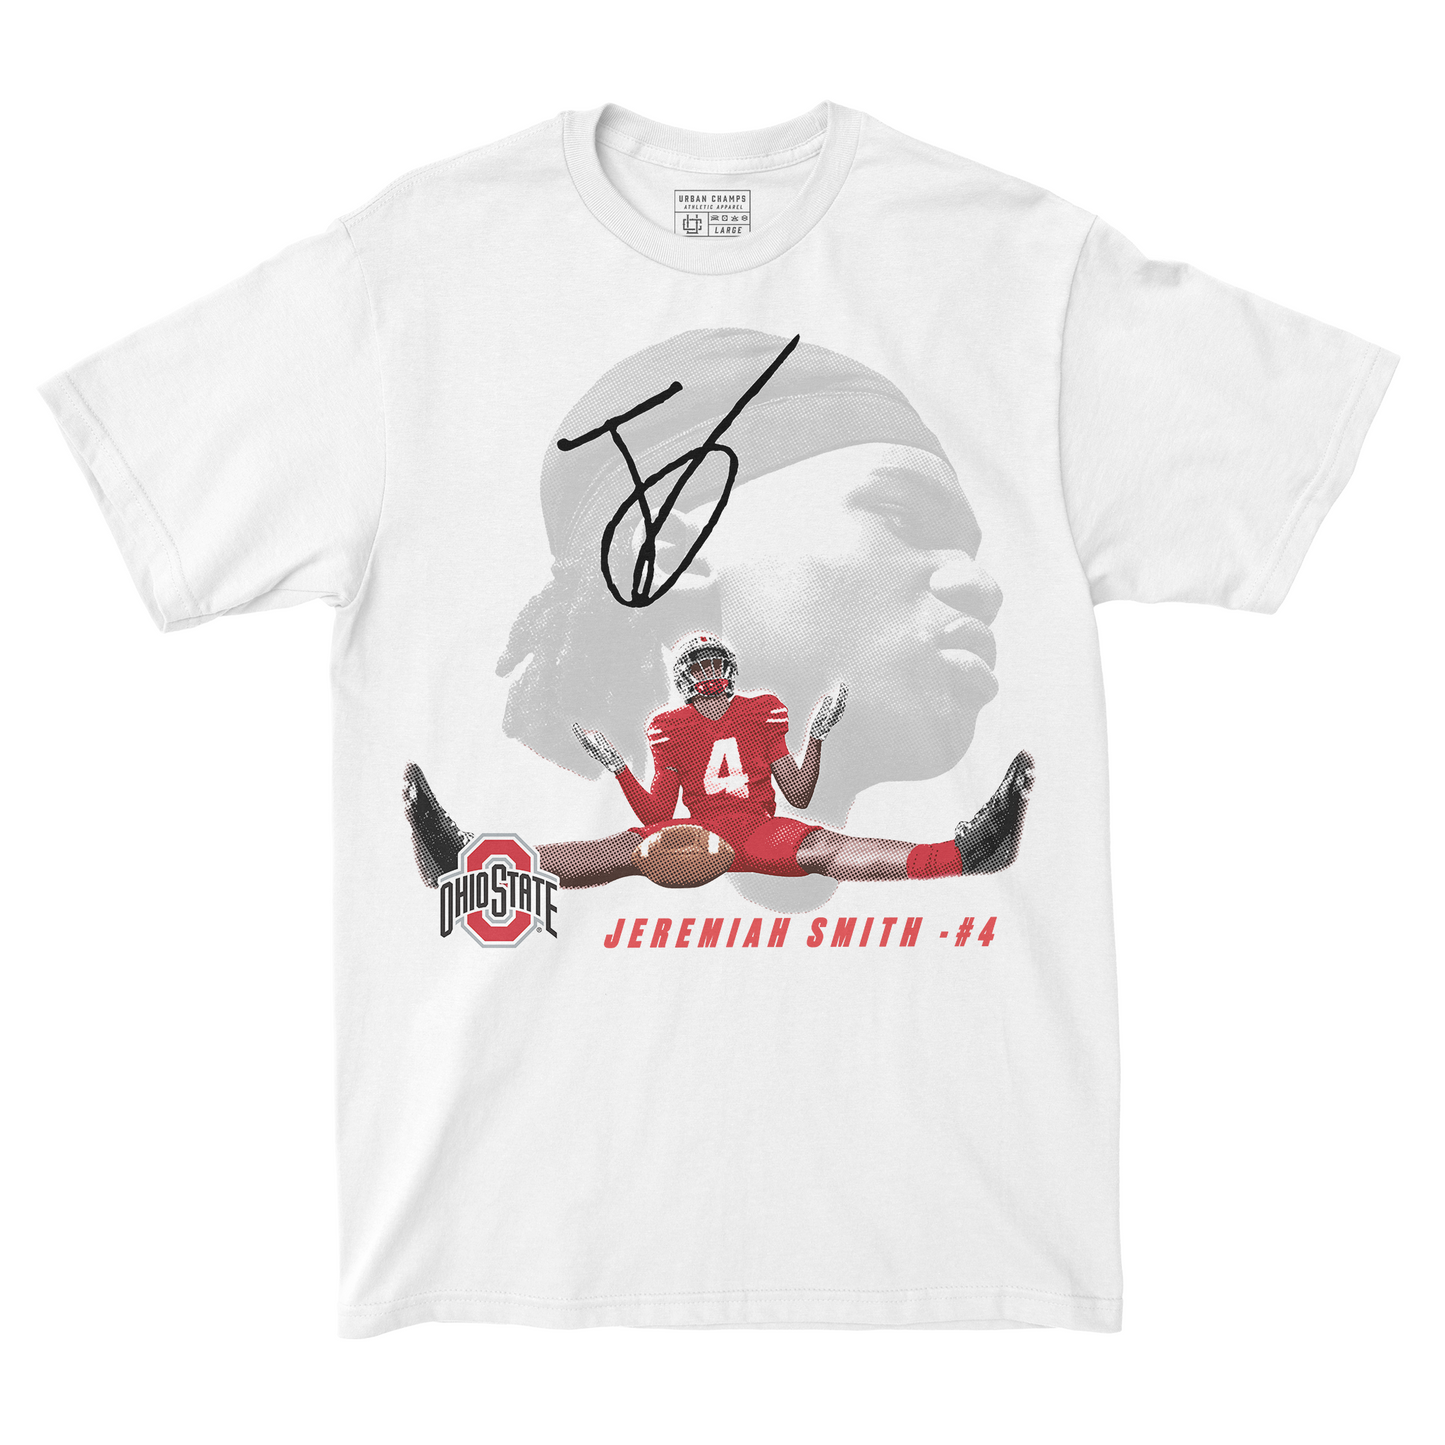 EXCLUSIVE RELEASE: Jeremiah Smith Signature Tee